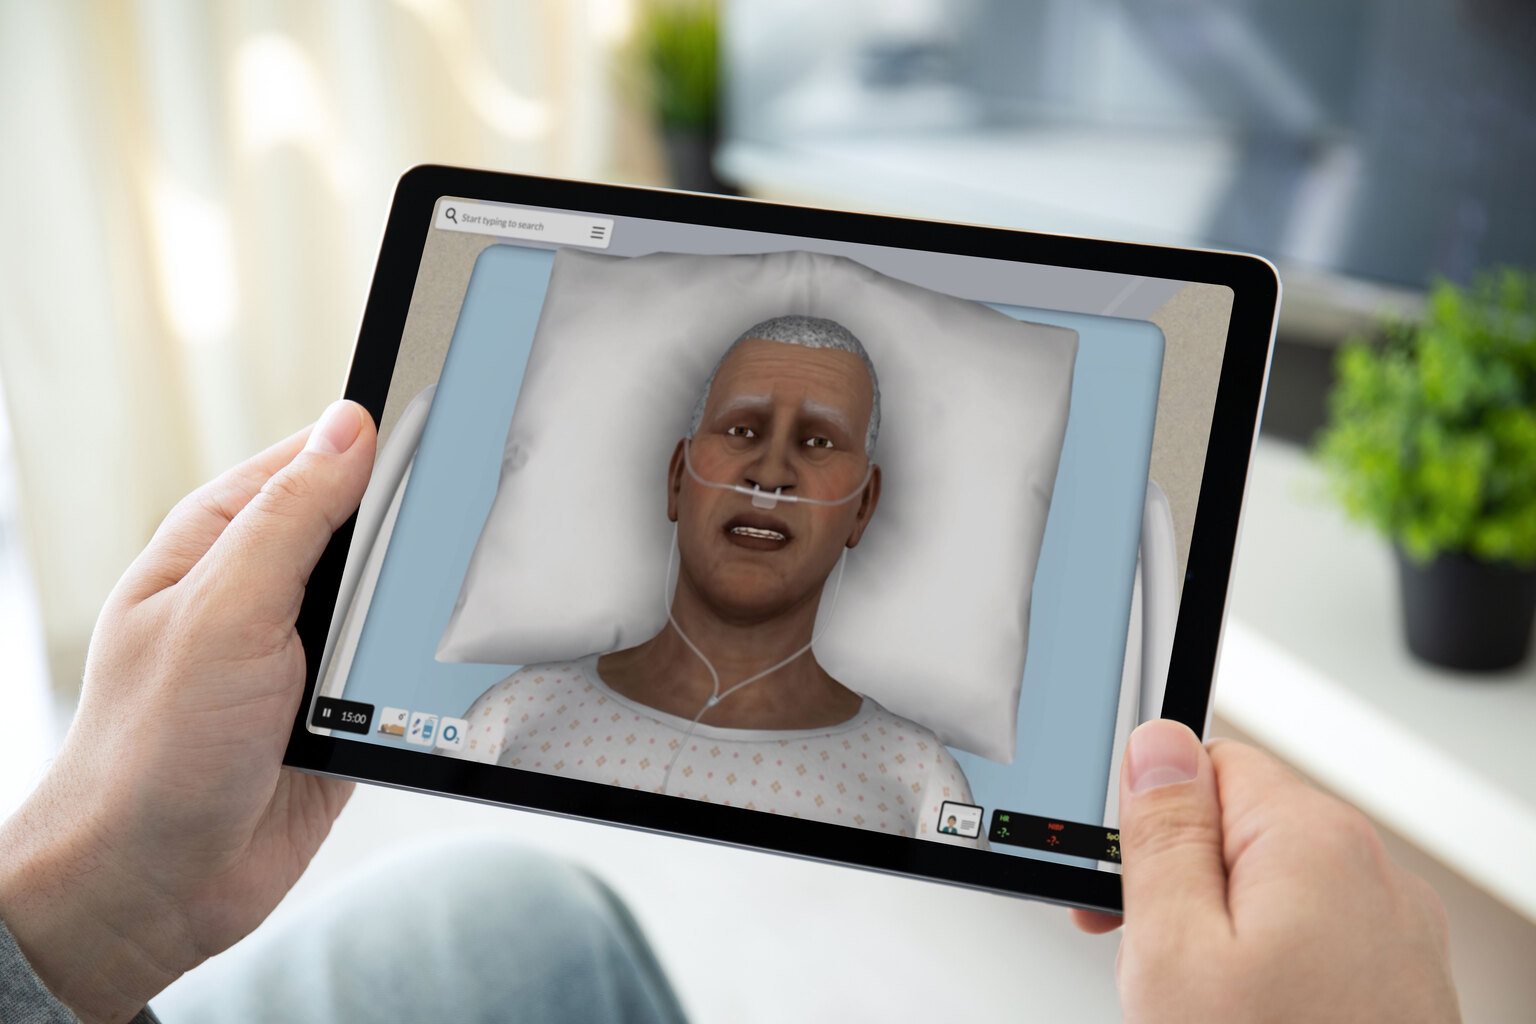 Close up on person holding a tablet and watching something from the vSim for Nursing app